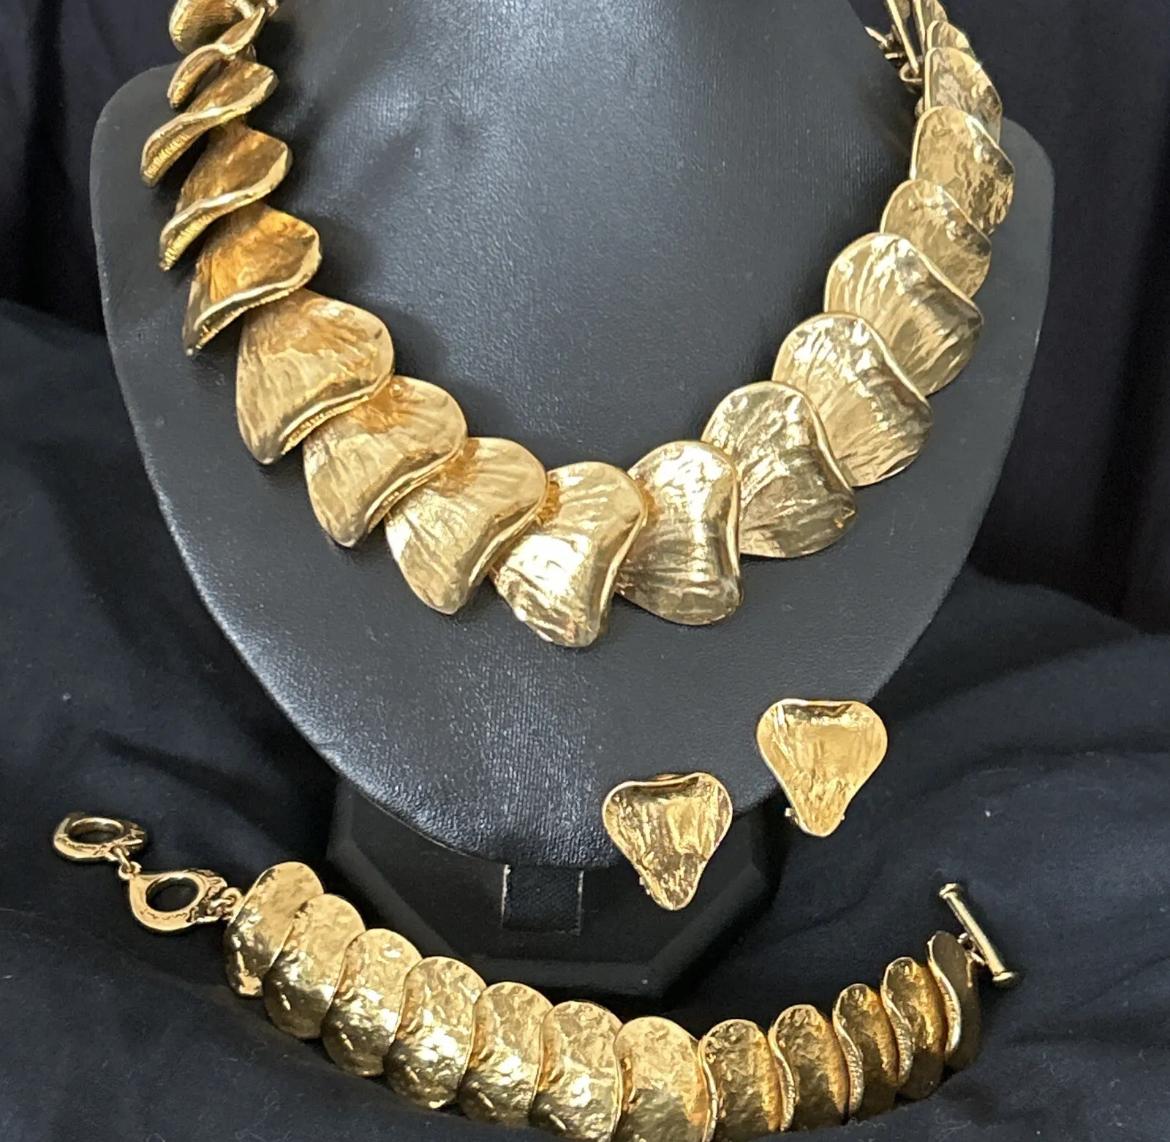 
Here is a Rare and Breathtaking  Yves Saint Laurent Vintage Heart Necklace, Bracelet and earrings.

It's a fabulous statement piece necklace with a matching bracelet and clip on earrings..

The set is vintage and is from the early 90s.

Gorgeous